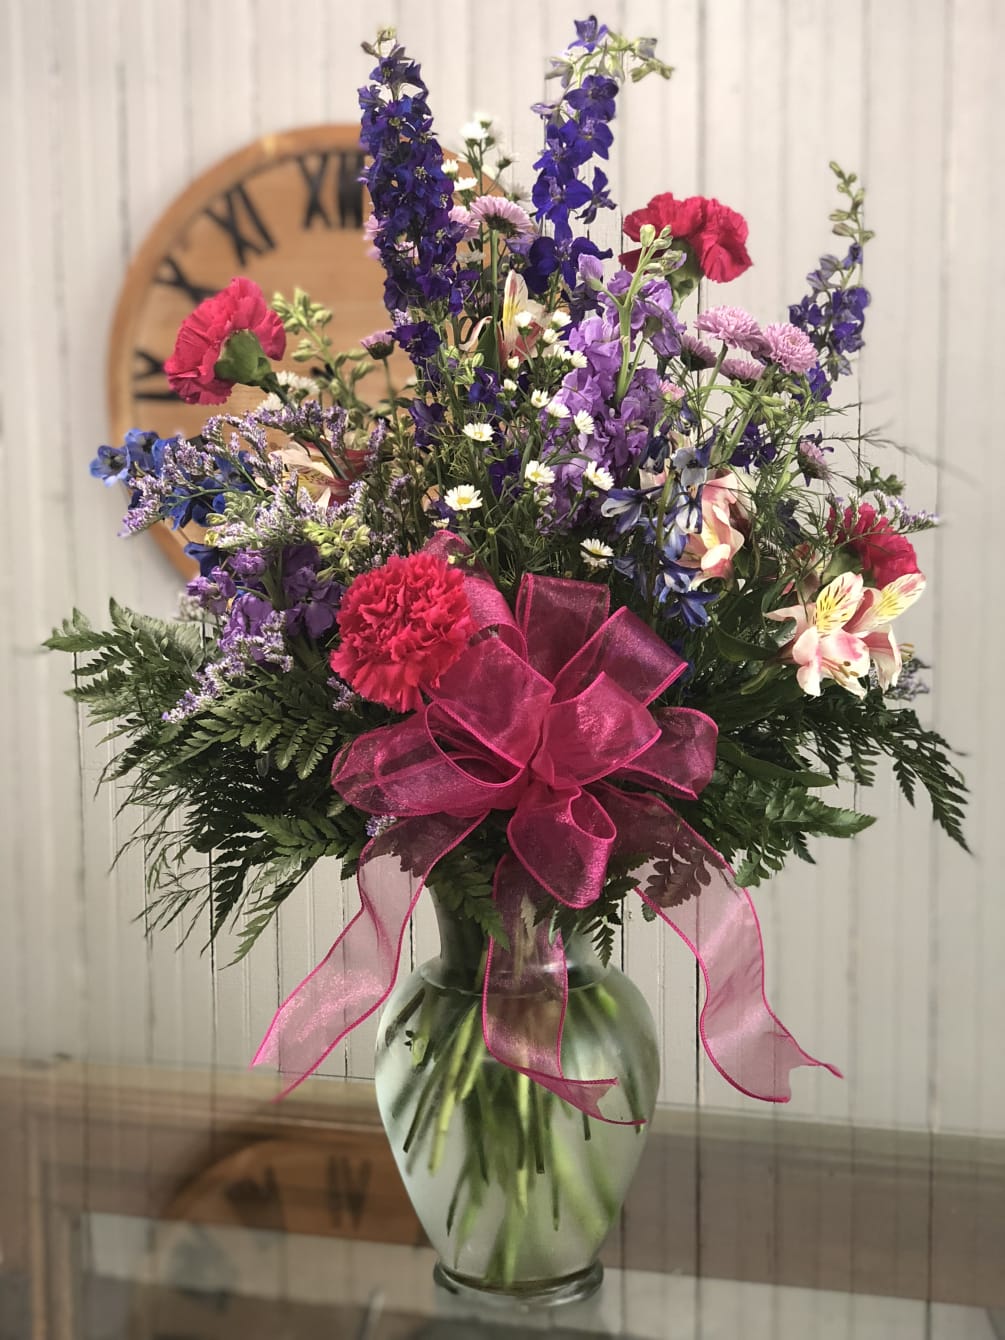 This is a large bouquet full of wildflowers in the colors of